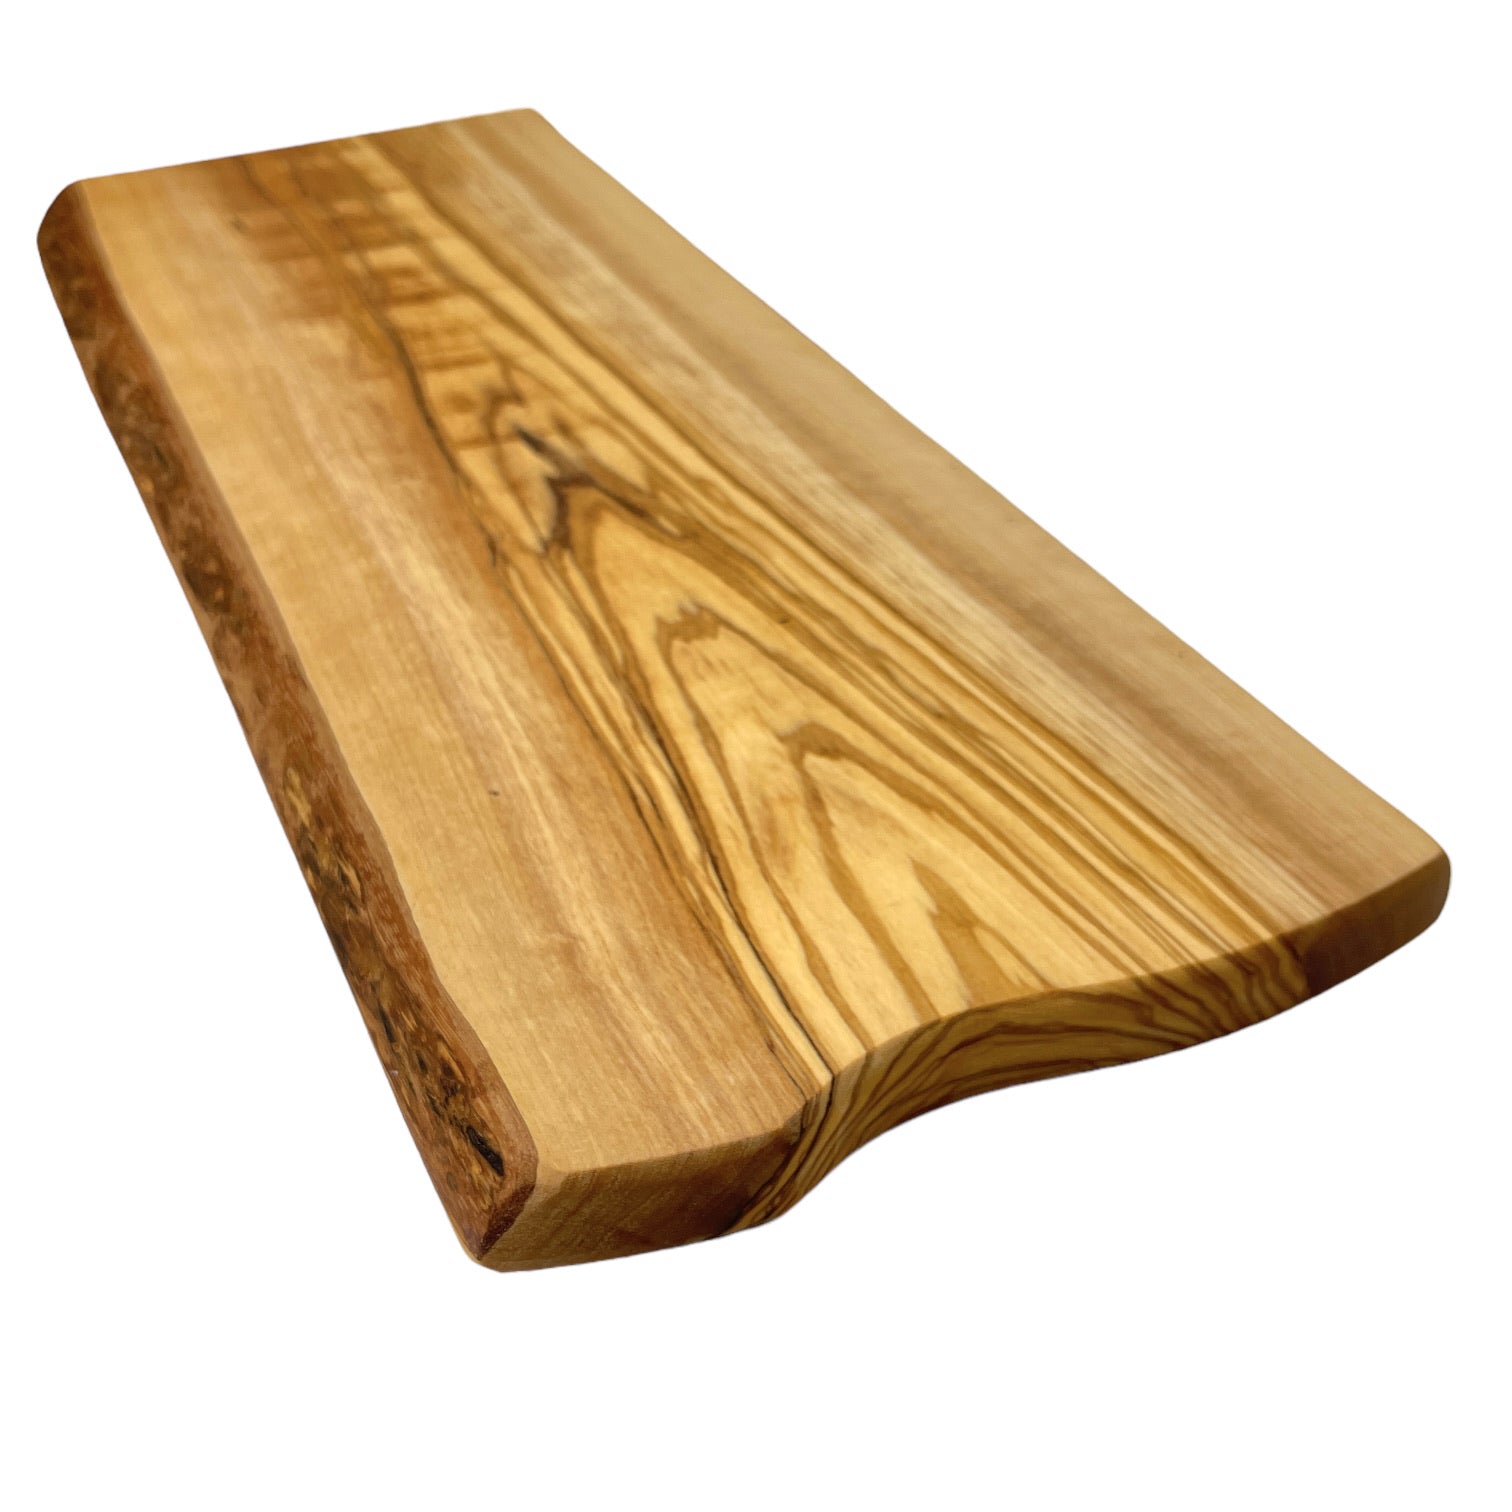 Live-edge Rustic Olive Wood - Handmade Charcuterie Boards - RTS tray top edge view